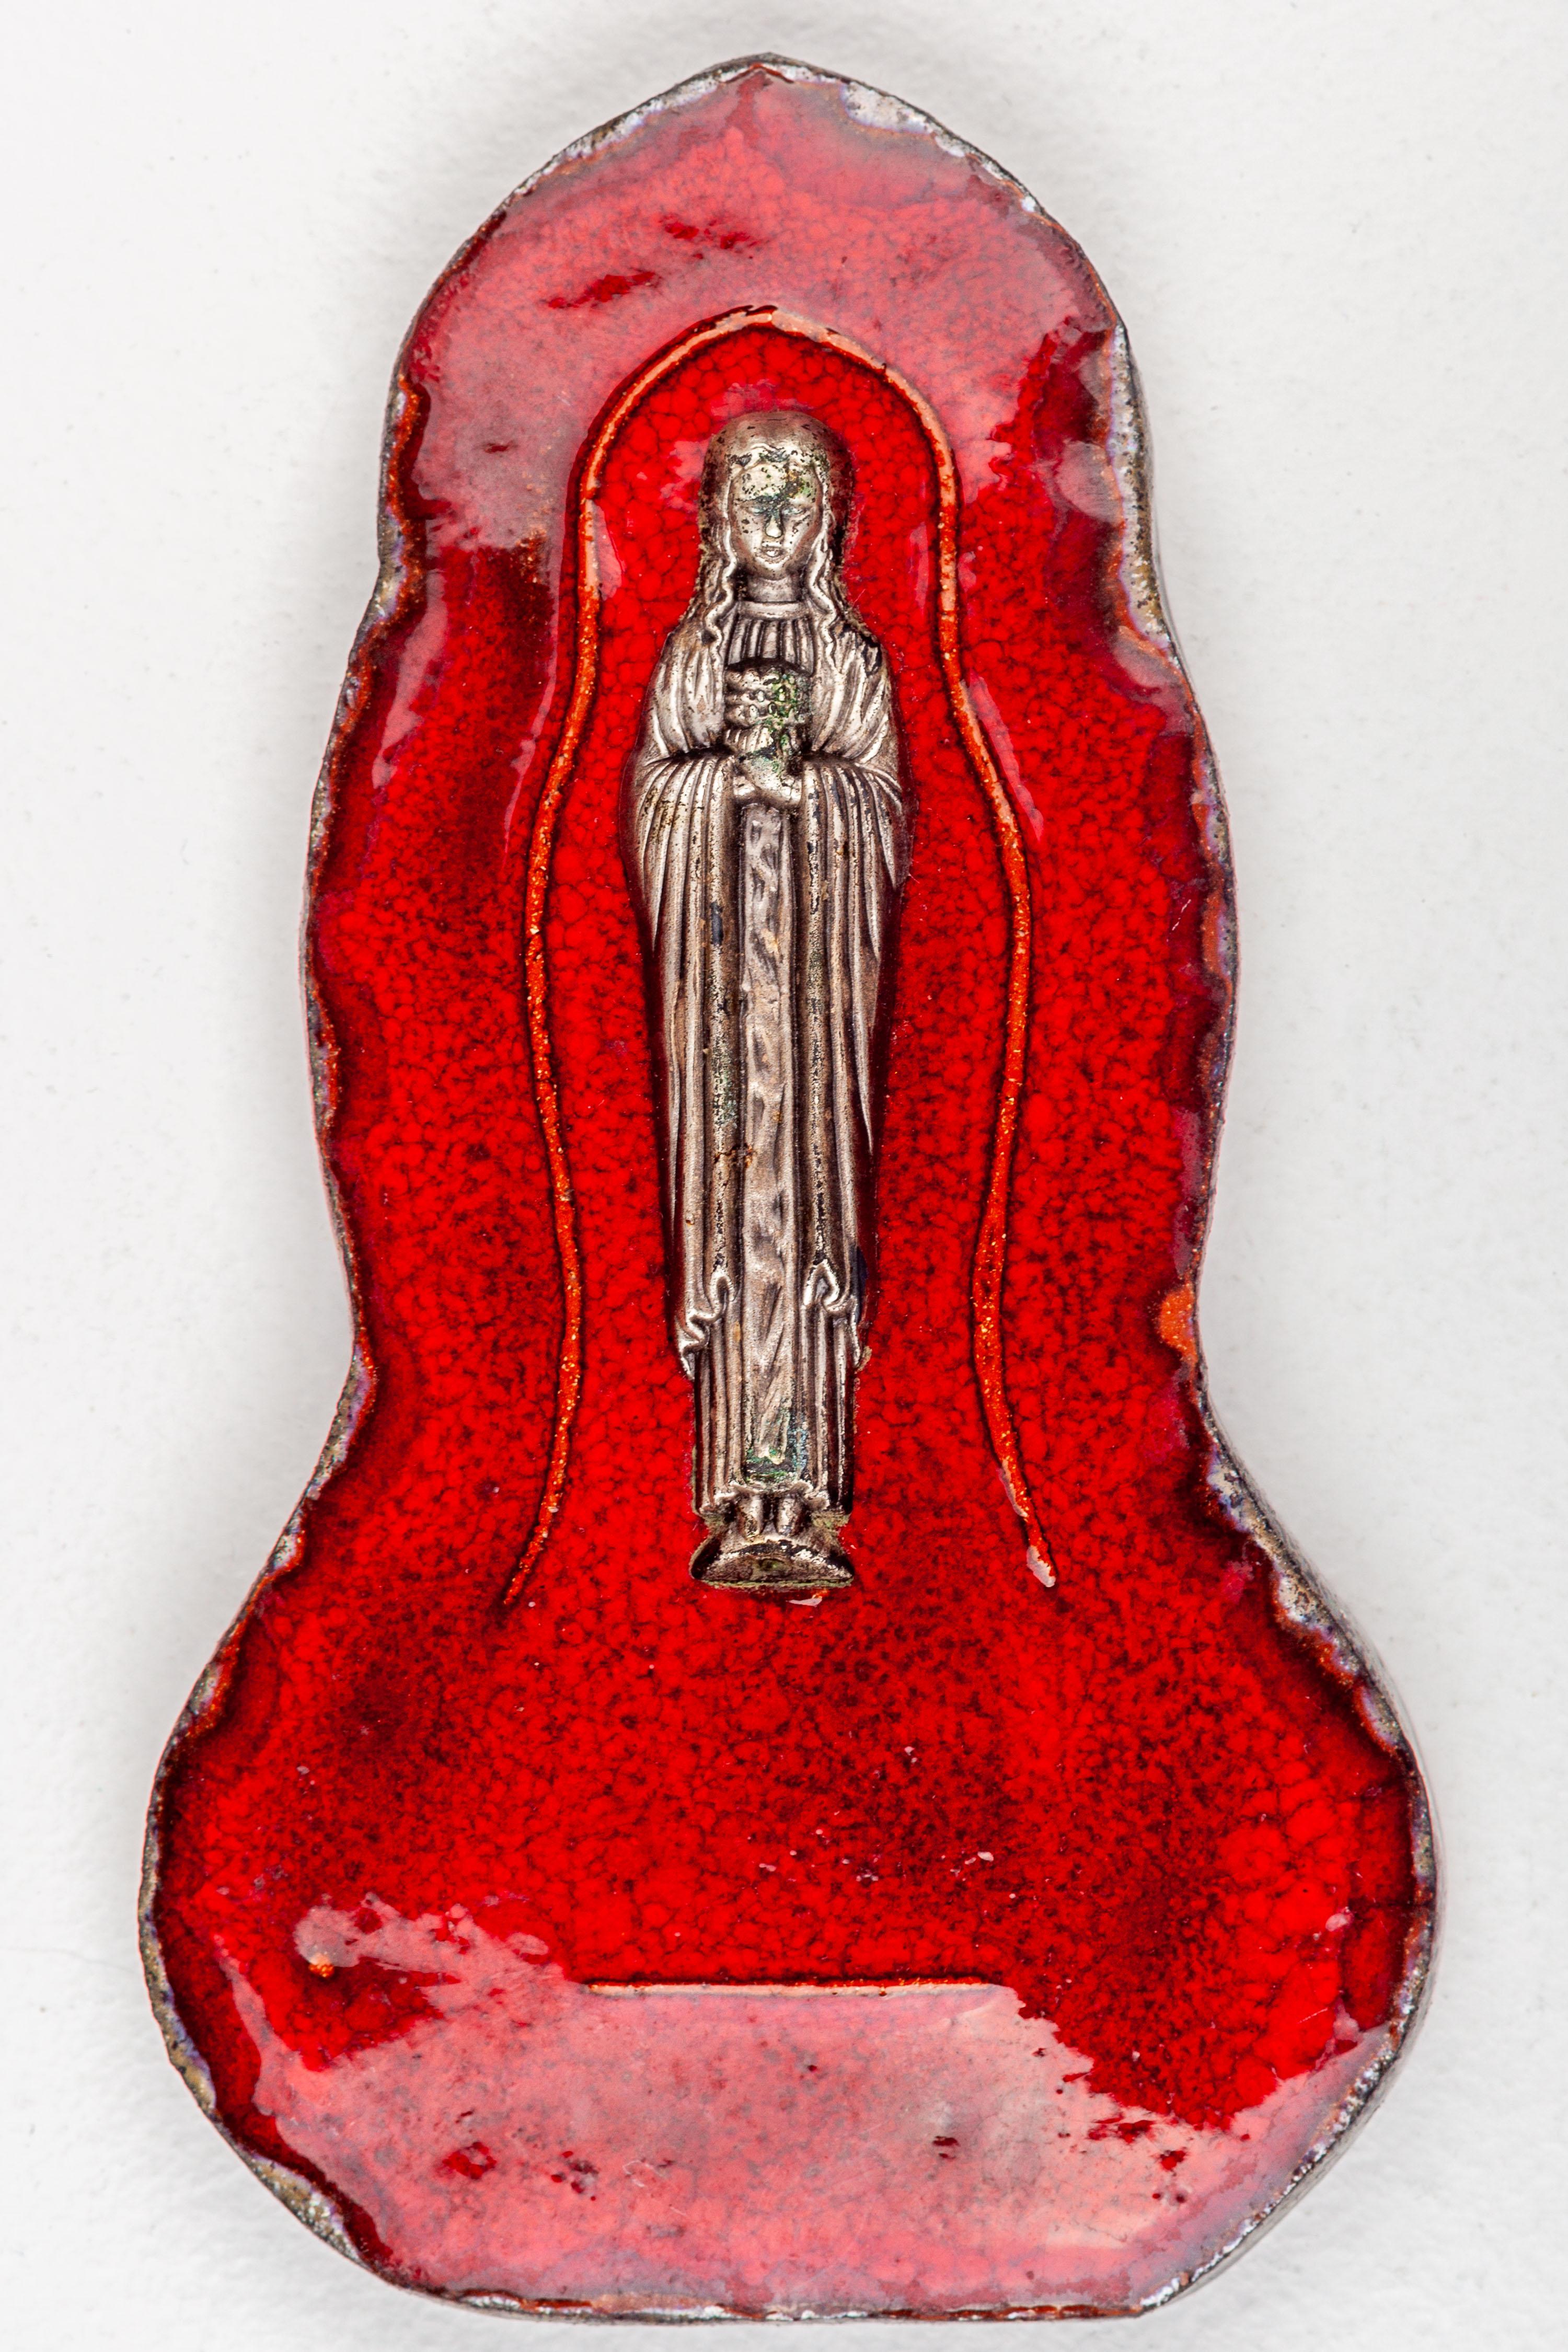 Midcentury Ceramic Wall Plaque with Metal Virgin Mary, European Studio Pottery For Sale 4